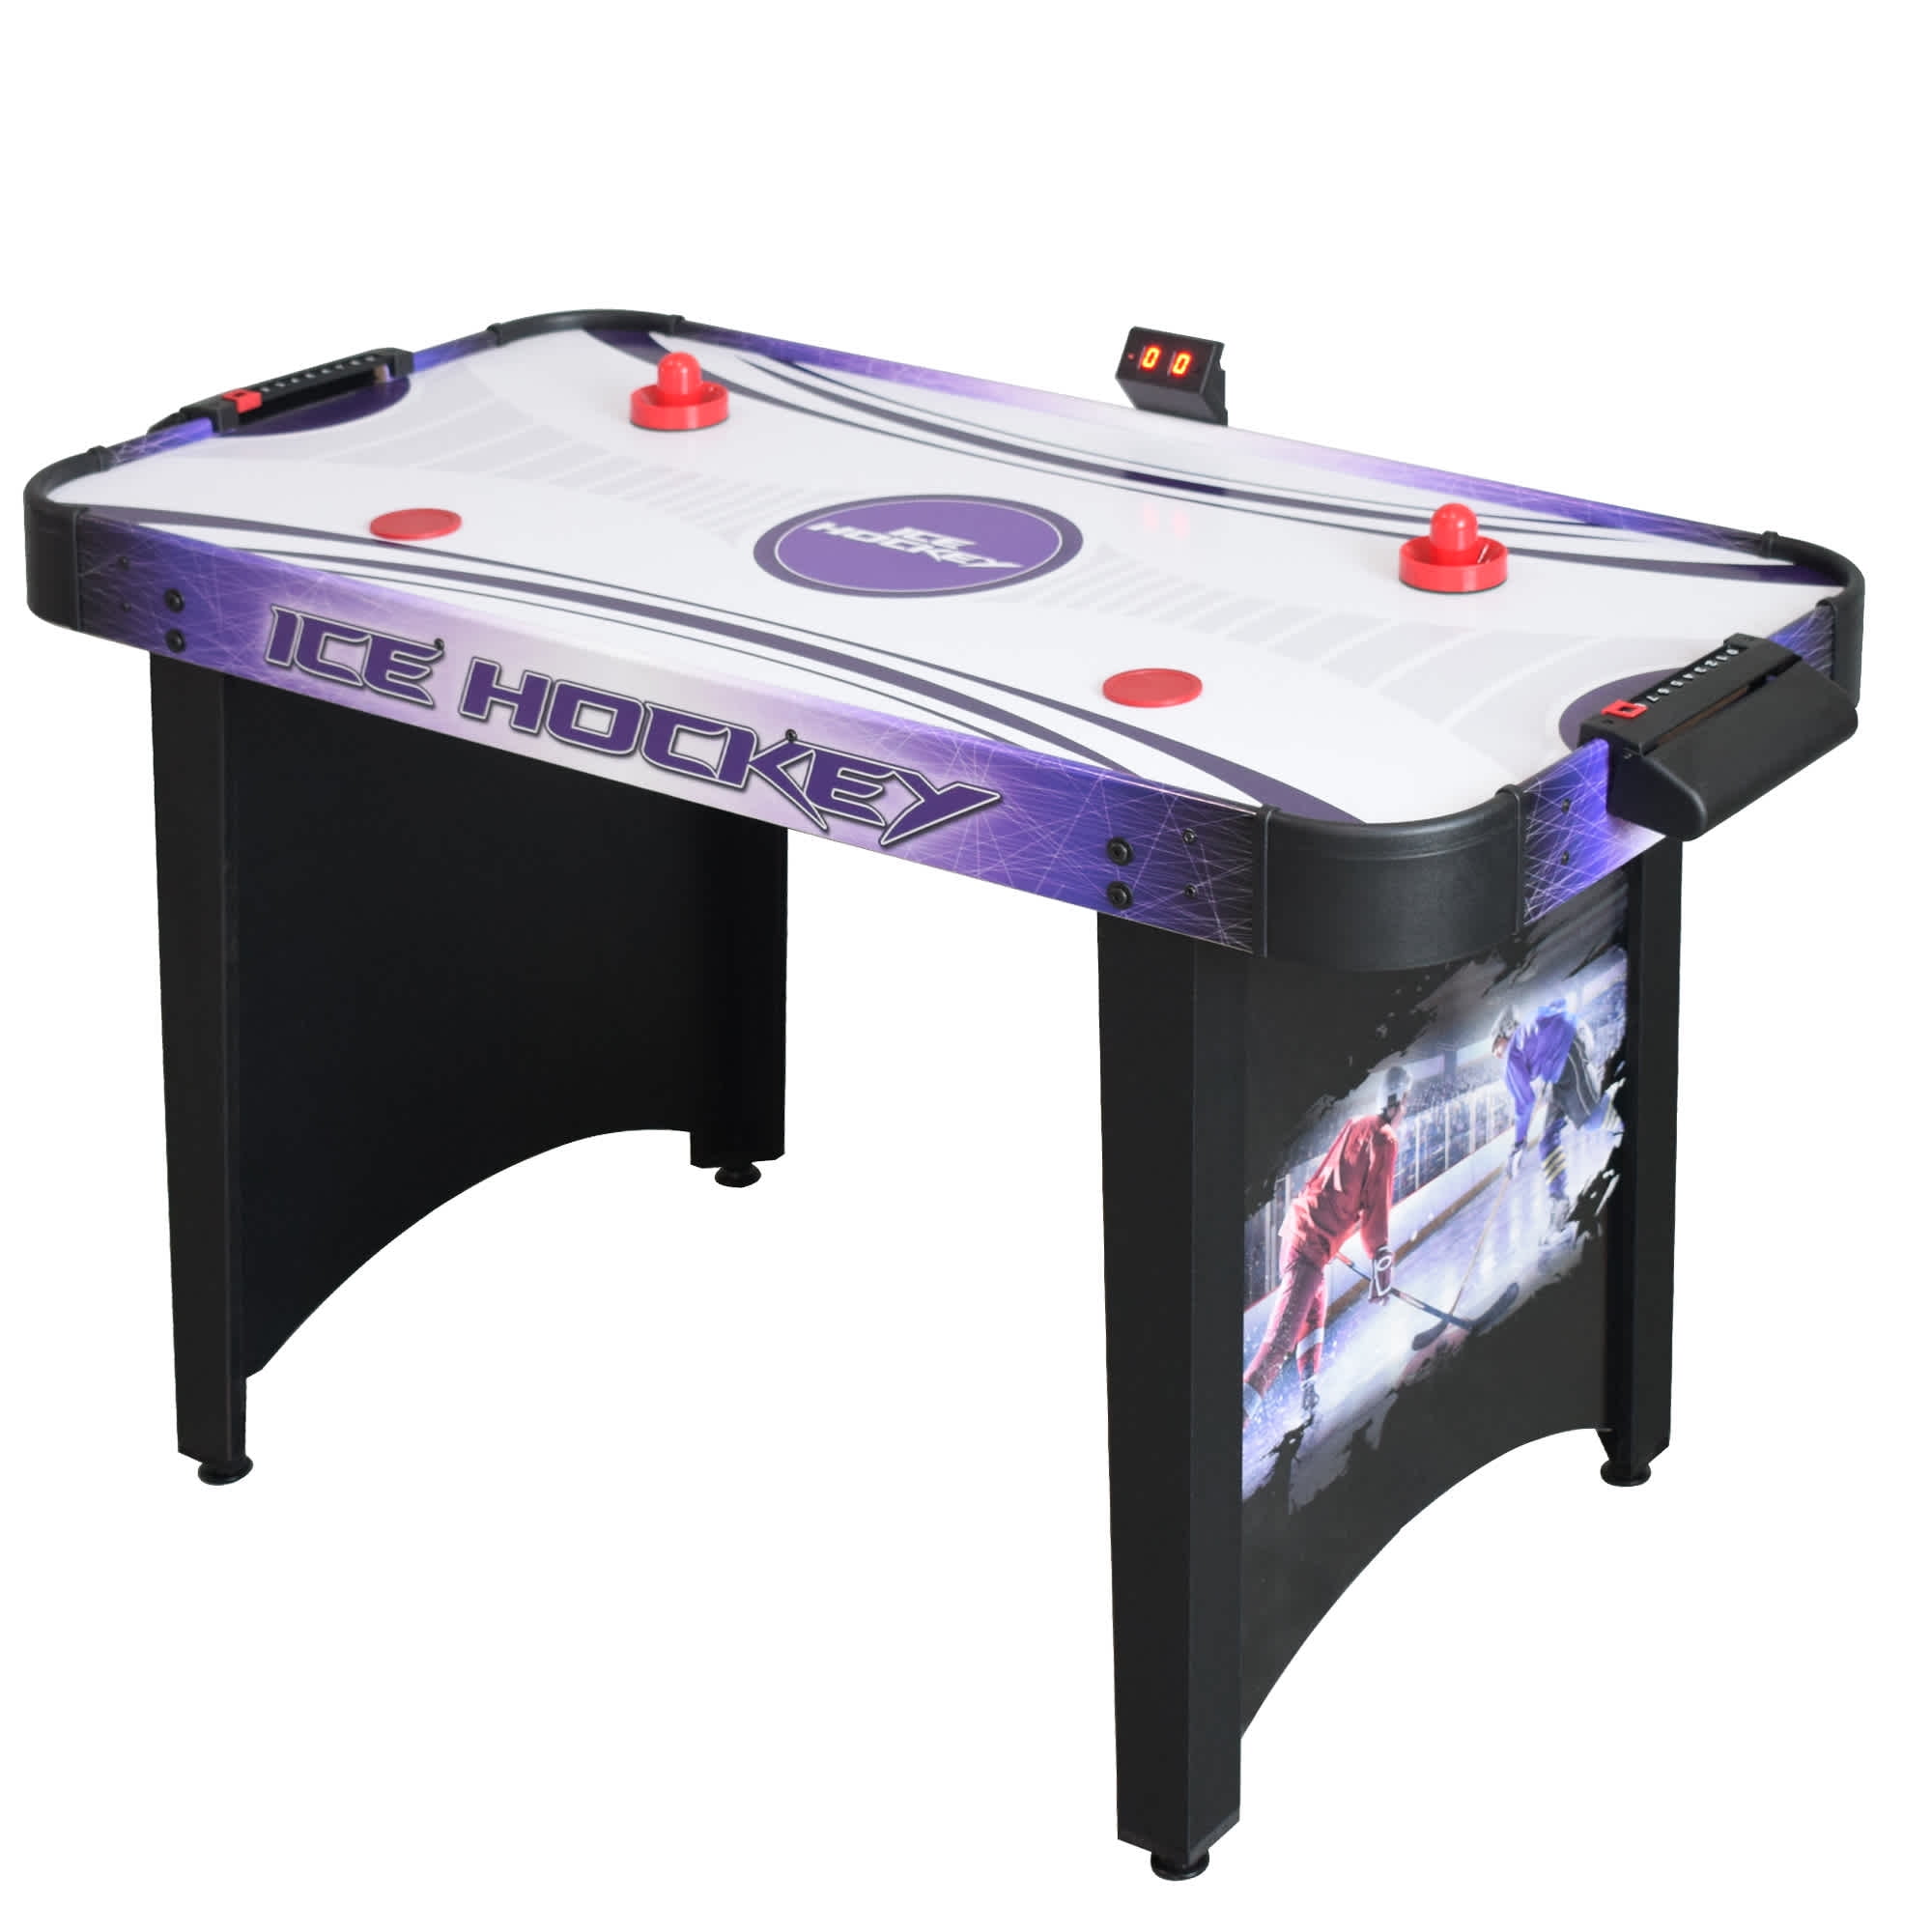 Leg Levelers and Built-in Puck Return – Includes Strikers and Pucks Great for Family Recreation Game Rooms Electronic Scoring Hathaway Patriot 5-Ft Air Hockey Table for Kids and Adults Blue/Black 